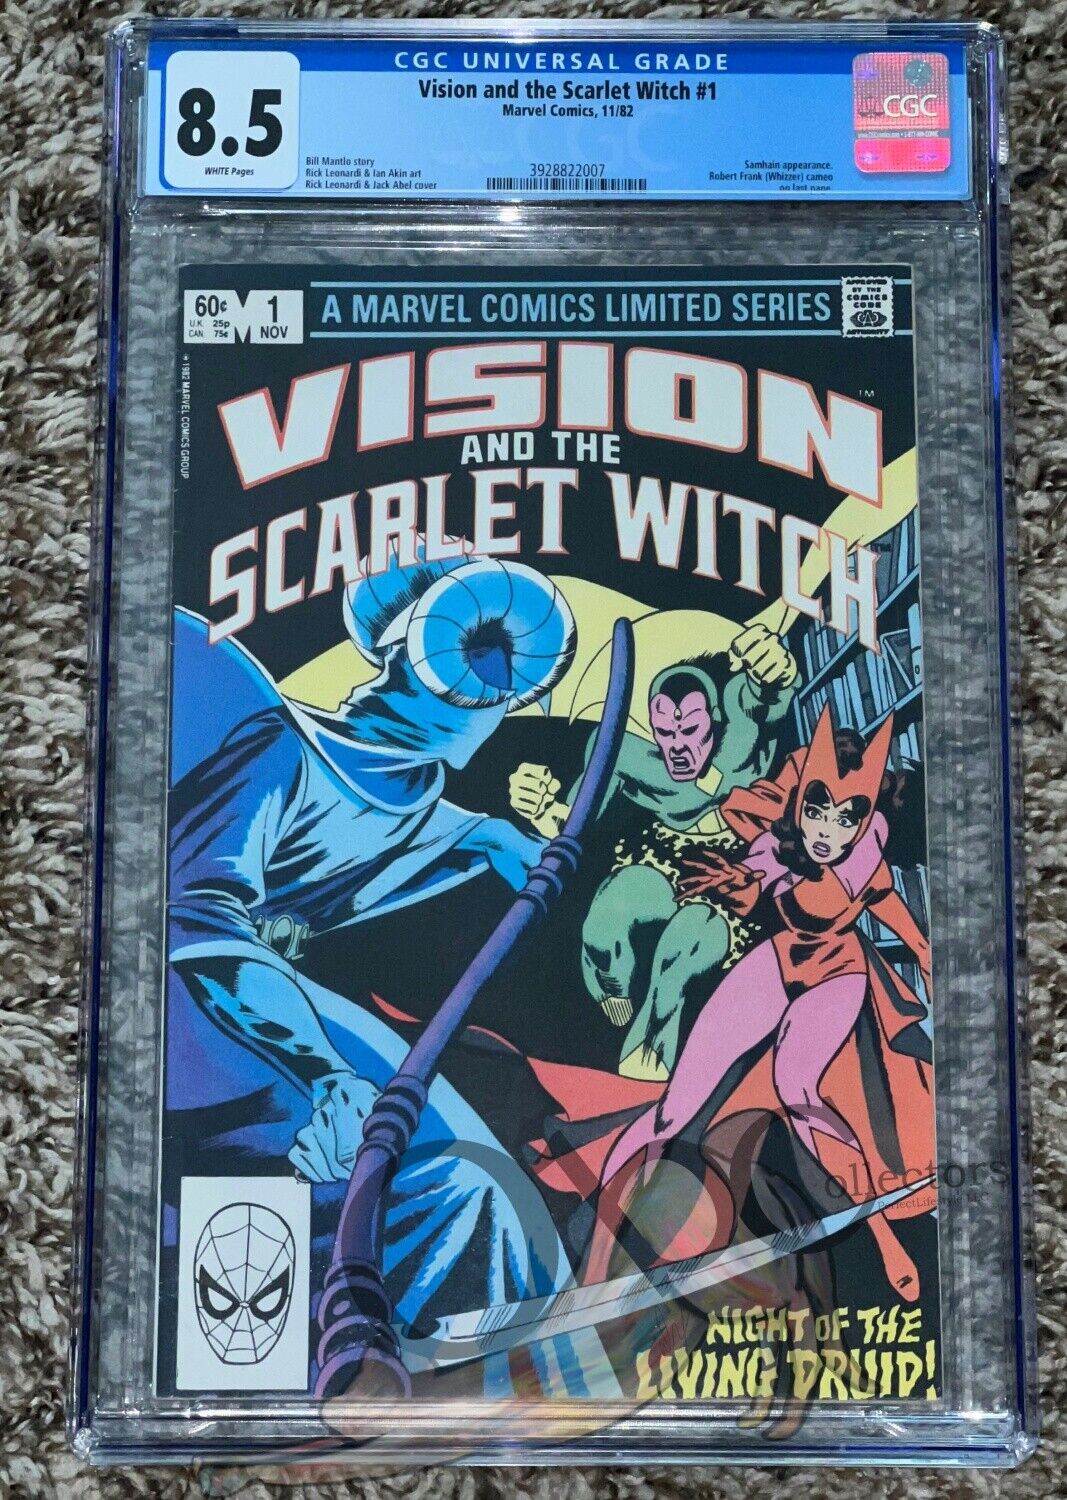 Vision and the Scarlet Witch #1 1982 CGC 8.5 Samhain Appearance Whizzer Cameo